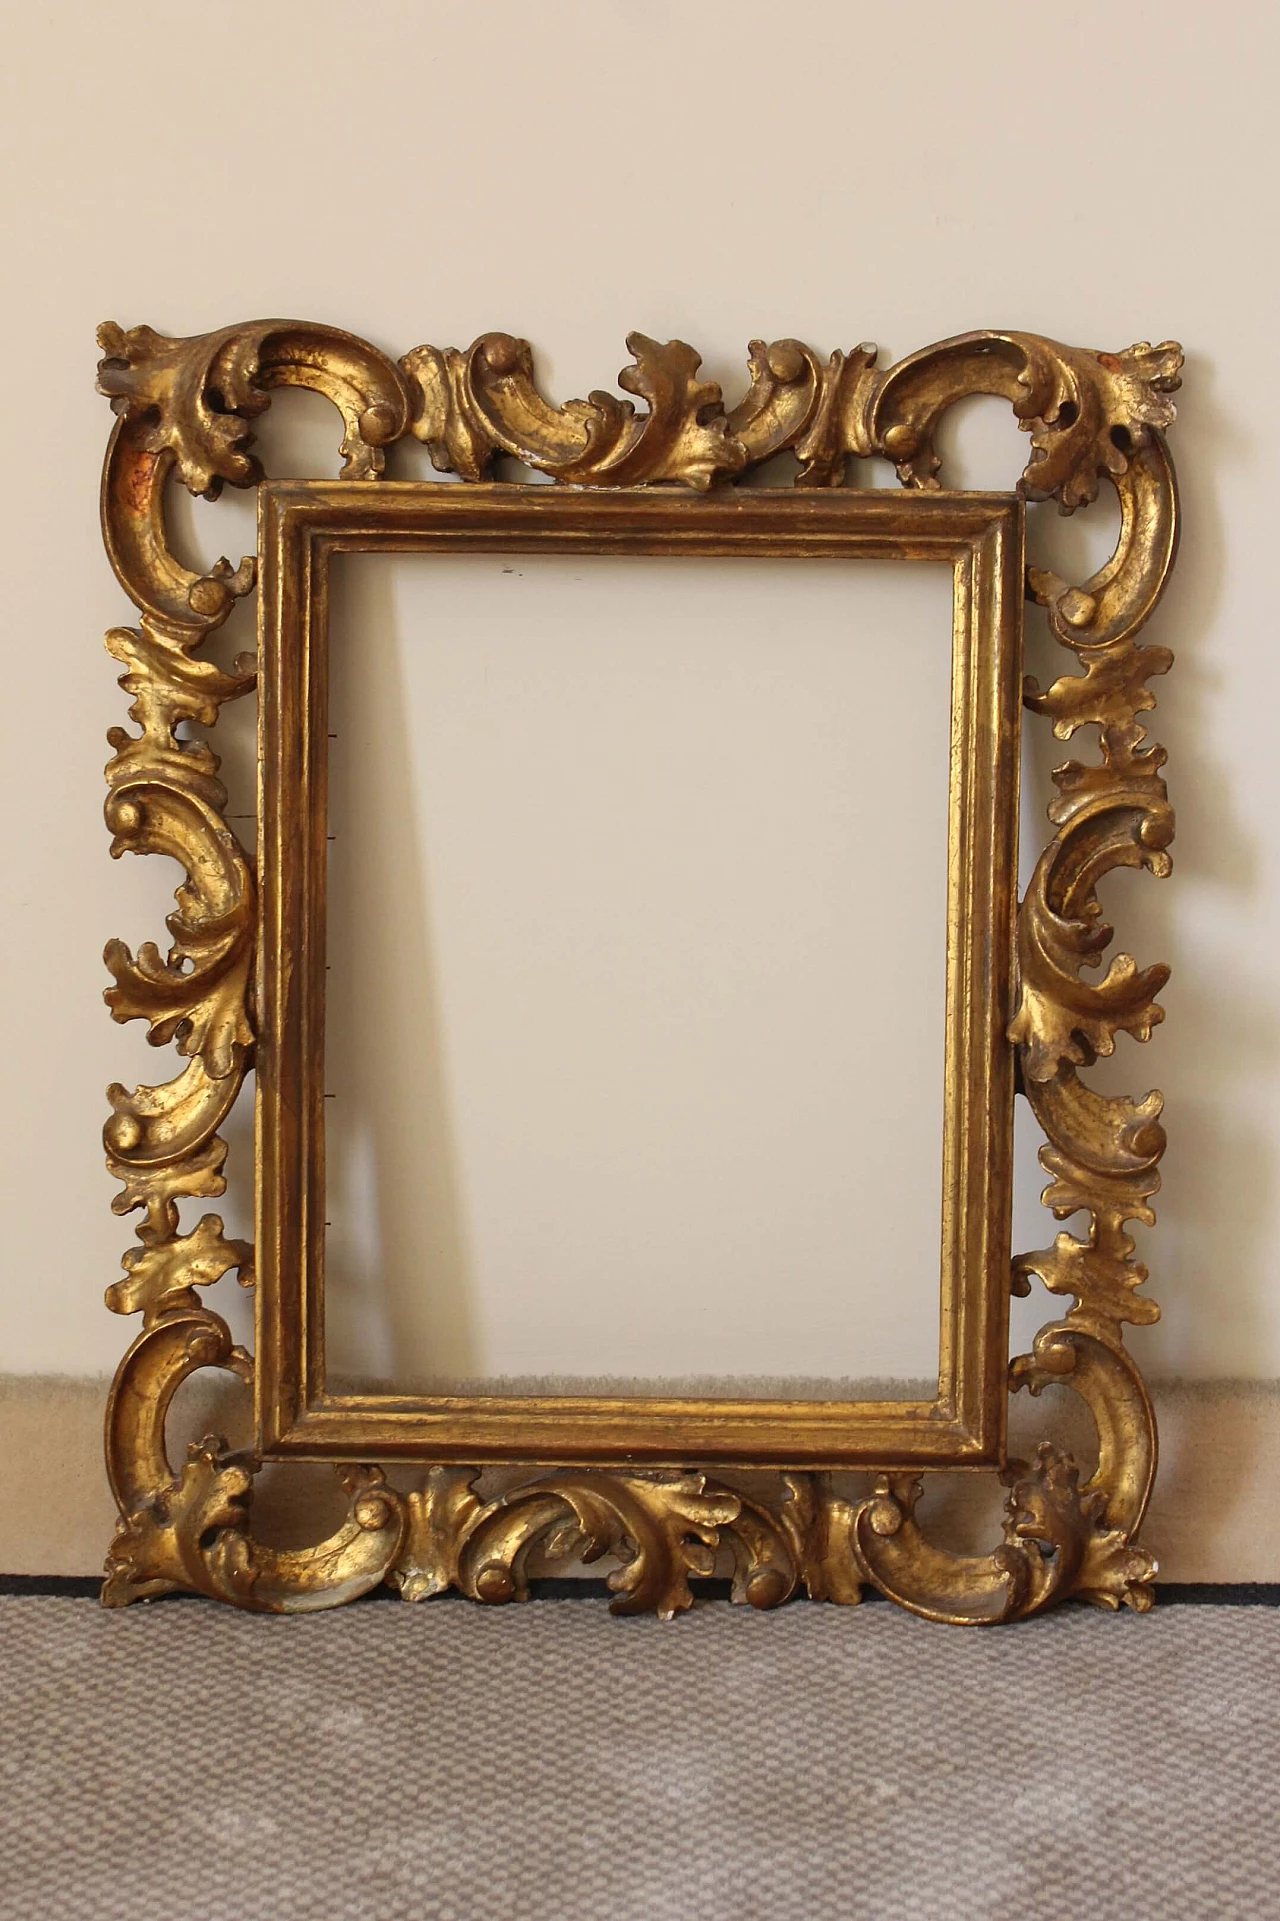 Wood and gilded plaster frame, 19th century 1223121